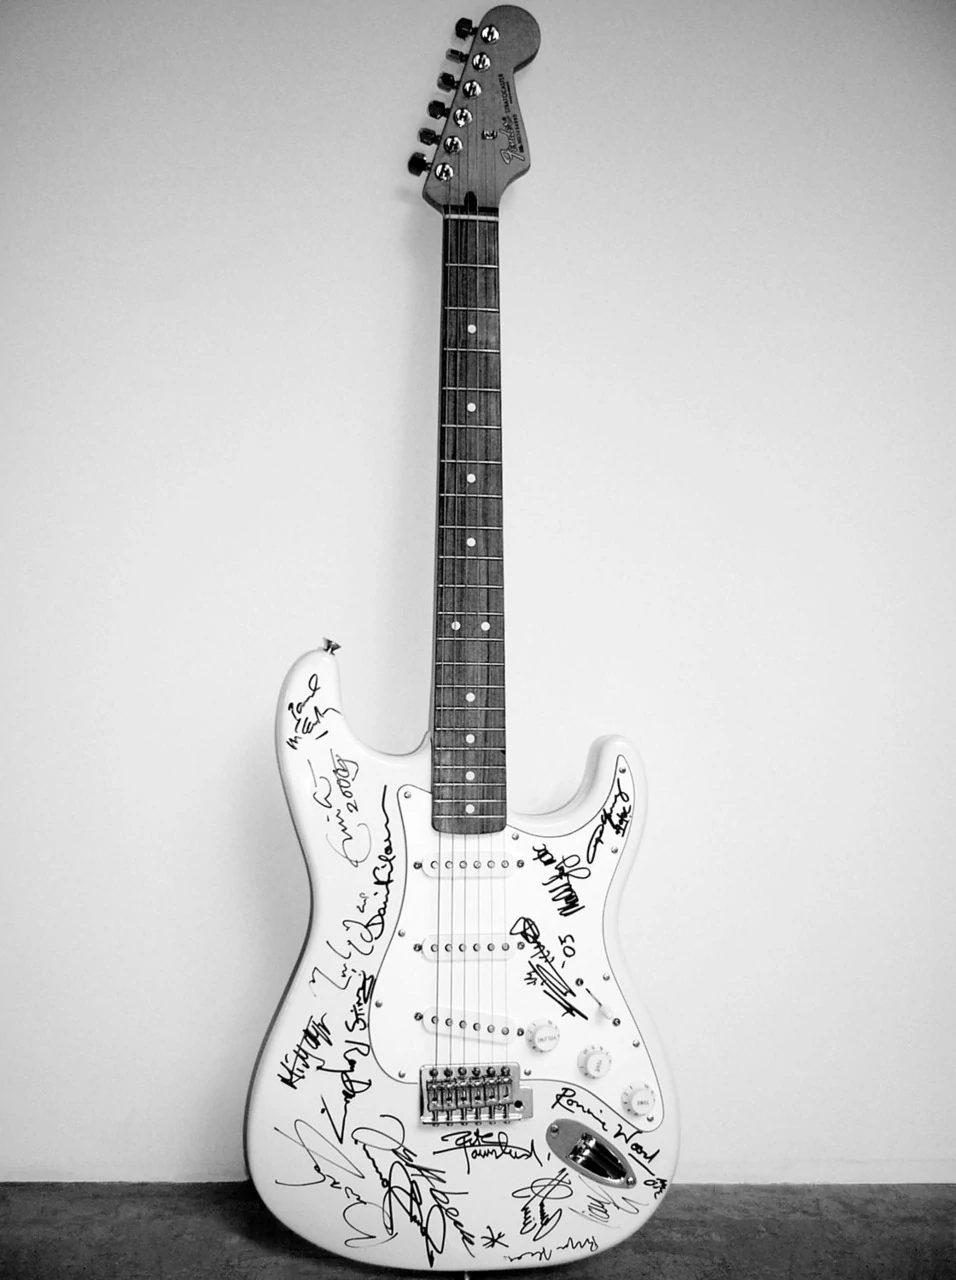 Fender ‘Reach Out To Asia’ Stratocaster